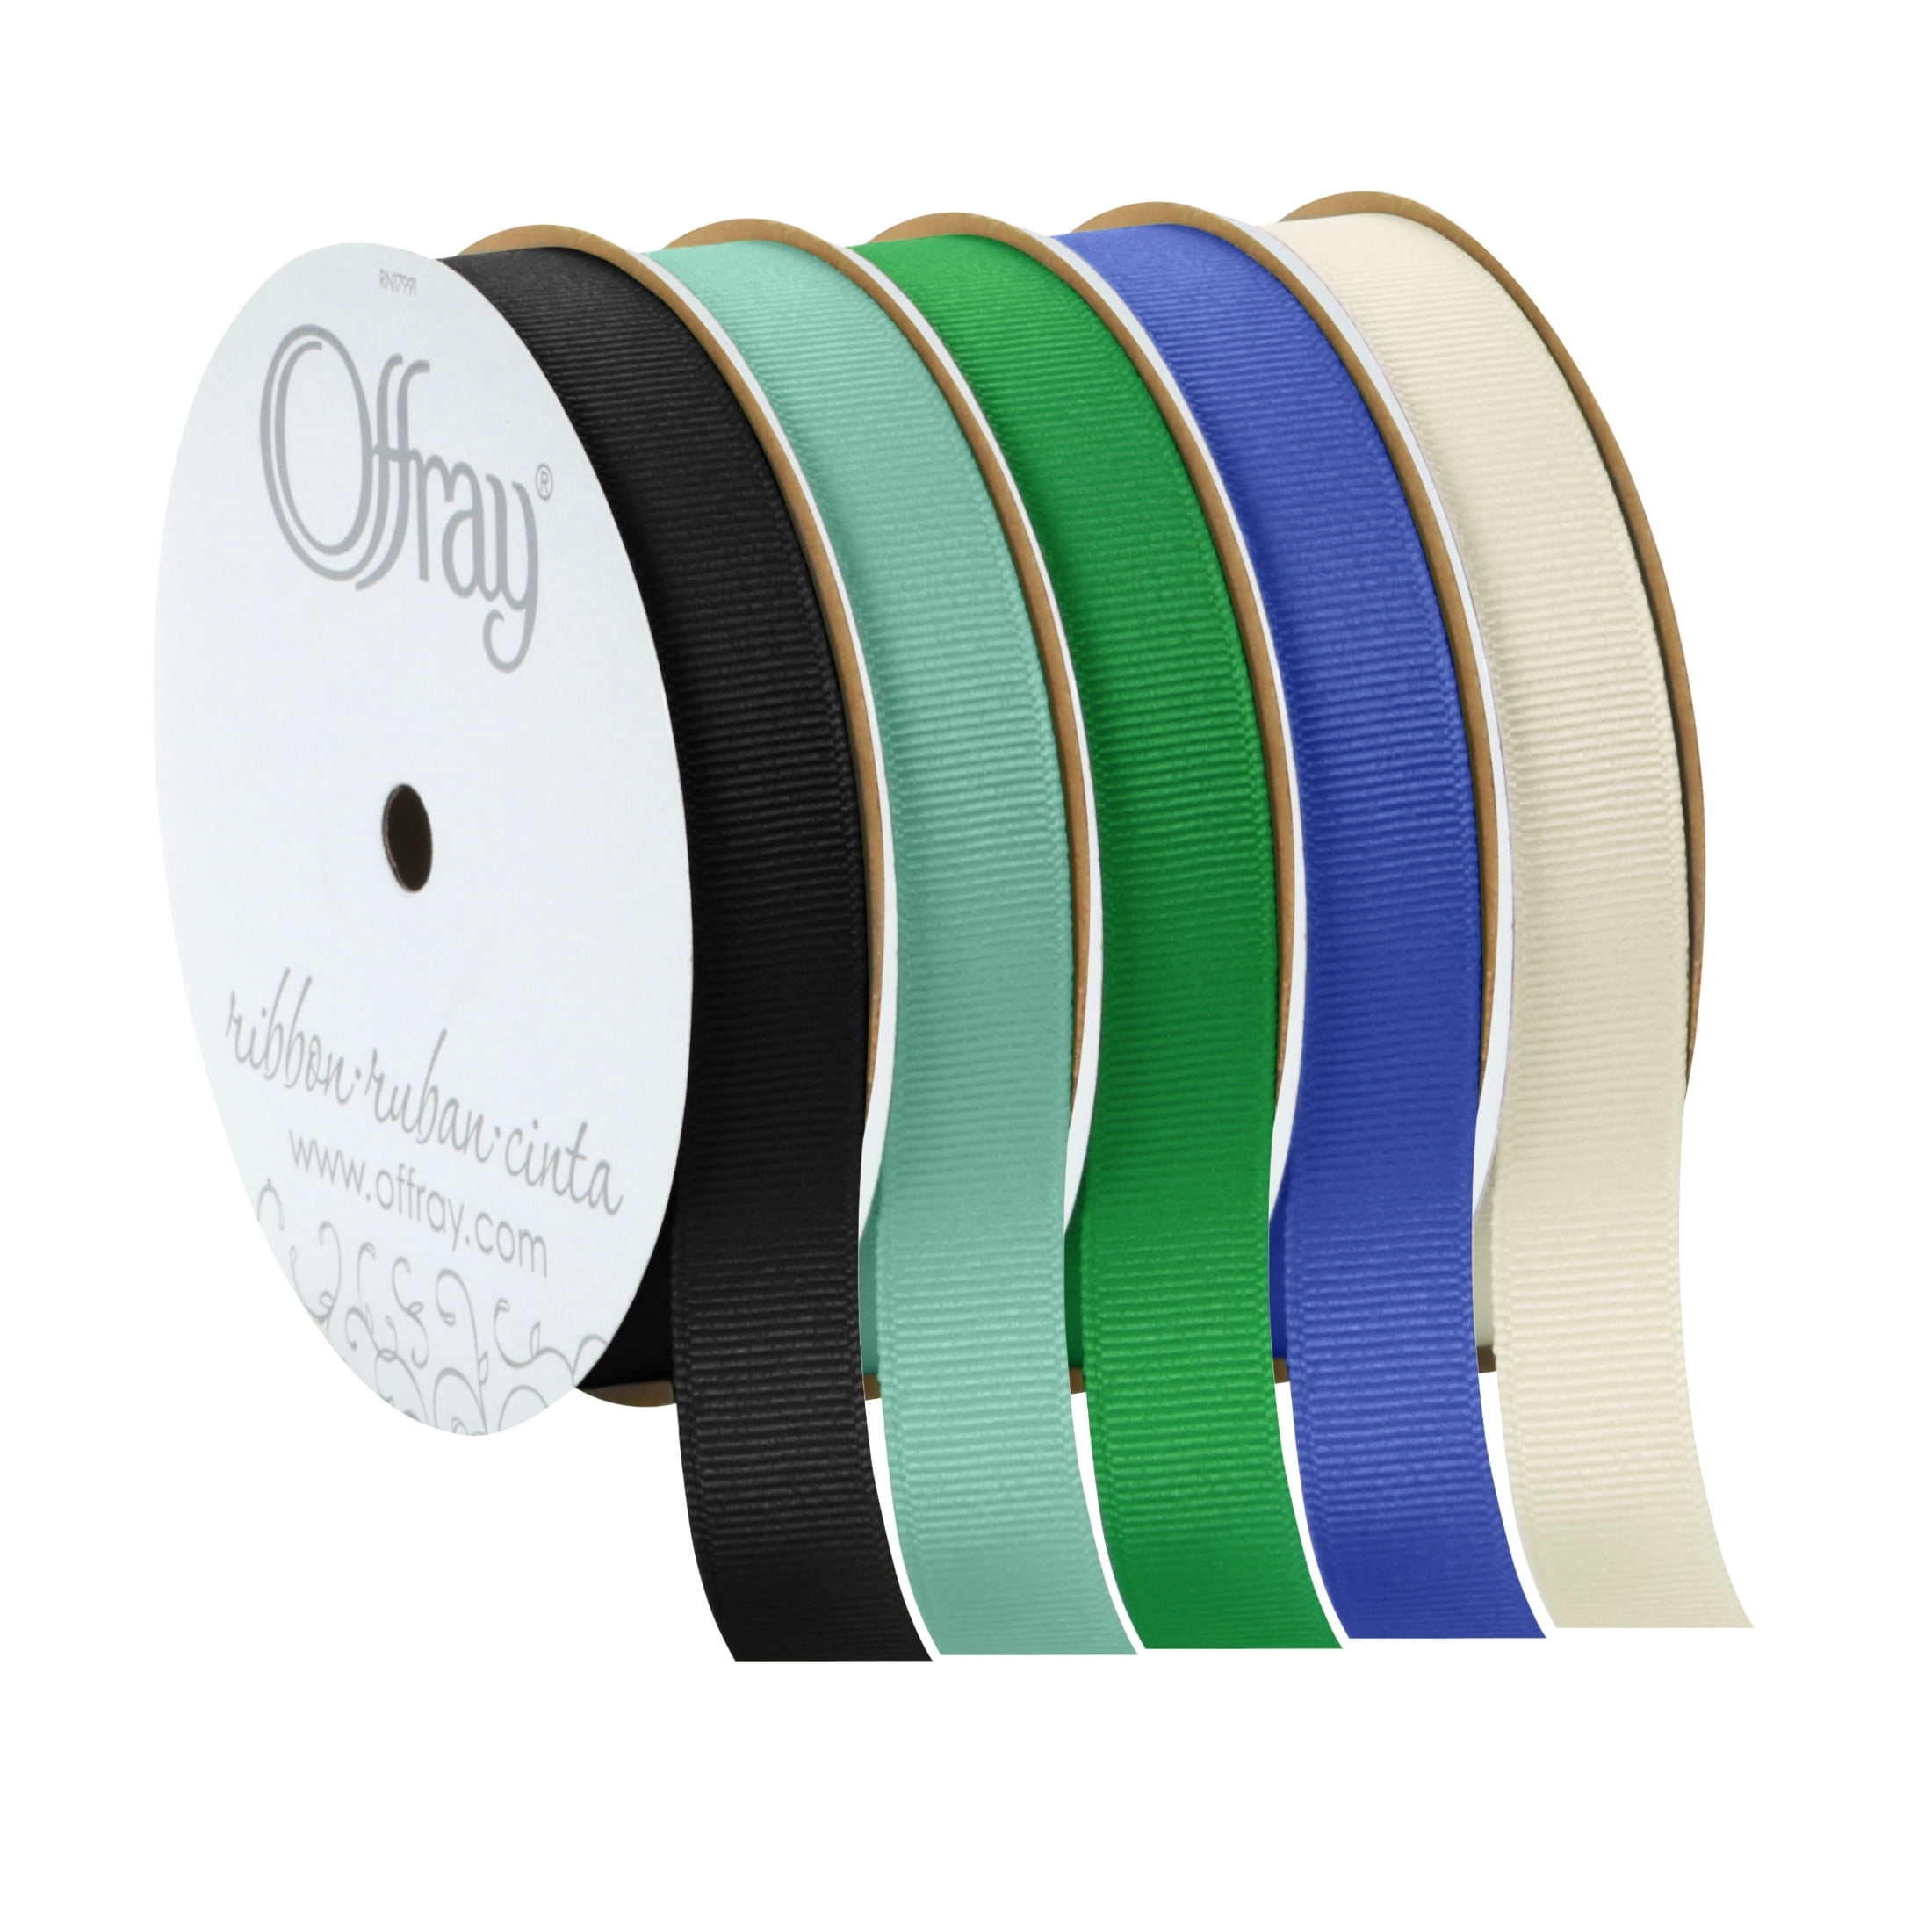 Offray Ribbon, Forest Green 5/8 inch Single Face Satin Polyester Ribbon, 18  feet 